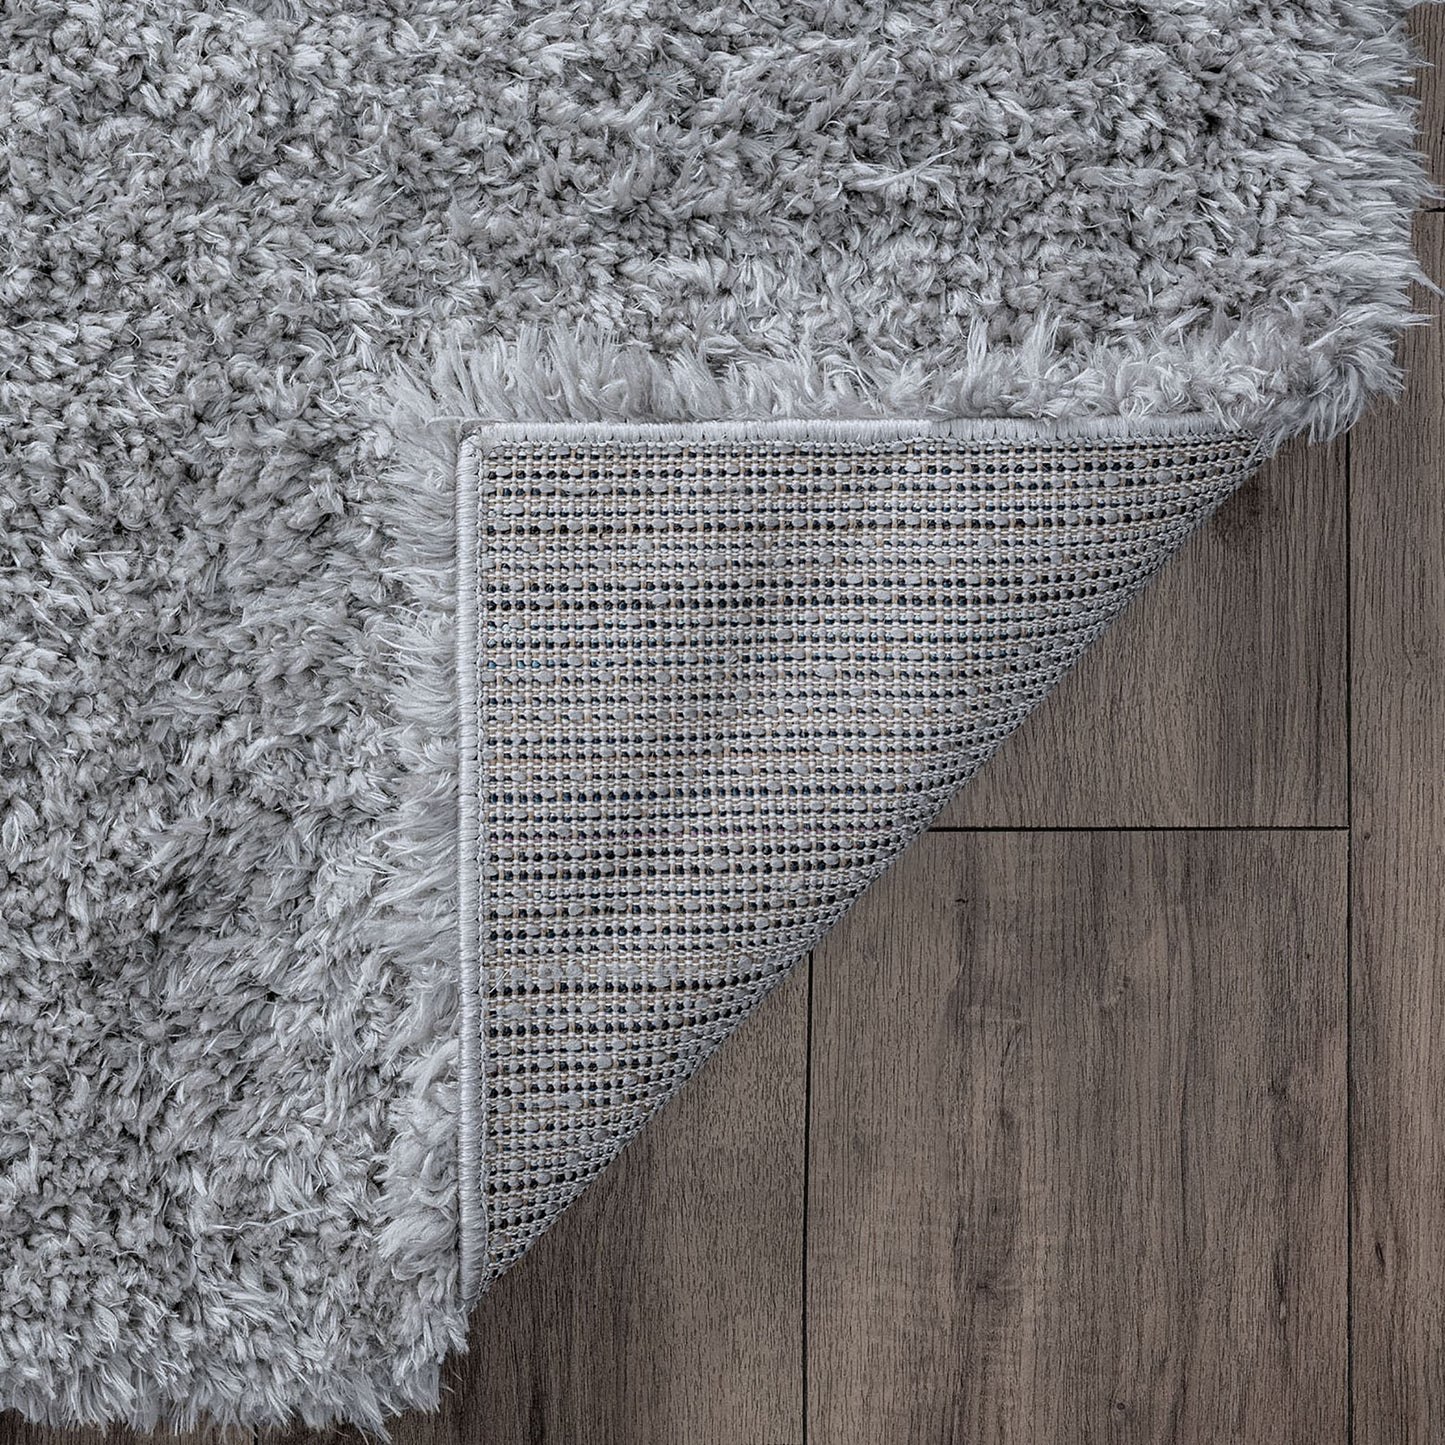 Heavenly Shag-HEA10 Cut Pile Synthetic Blend Indoor Area Rug by Tayse Rugs